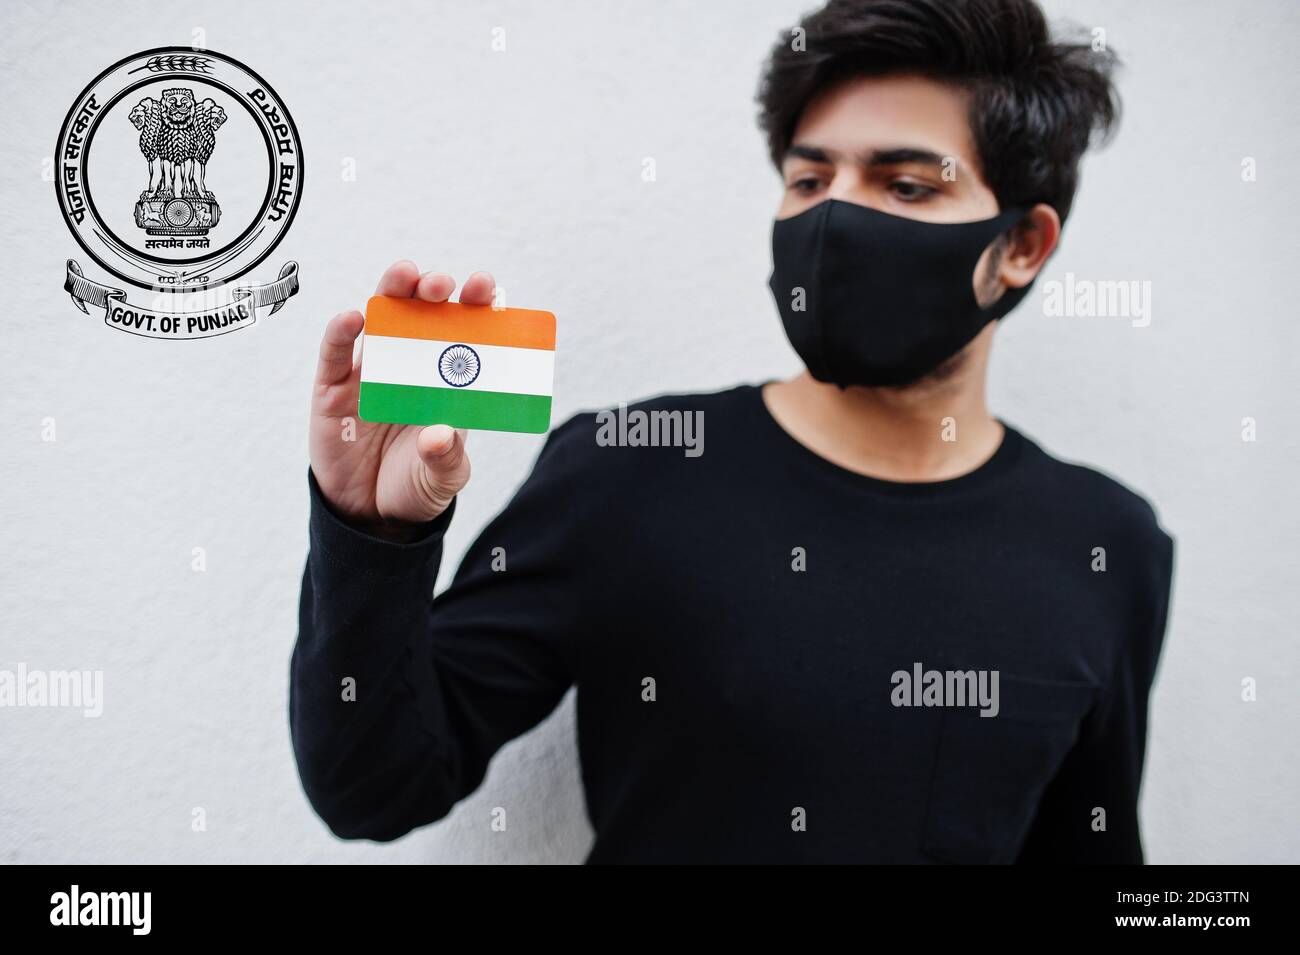 Indian man wear all black and face mask, hold India flag in hand isolated on white background with Punjab state emblem . Coronavirus India states and Stock Photo